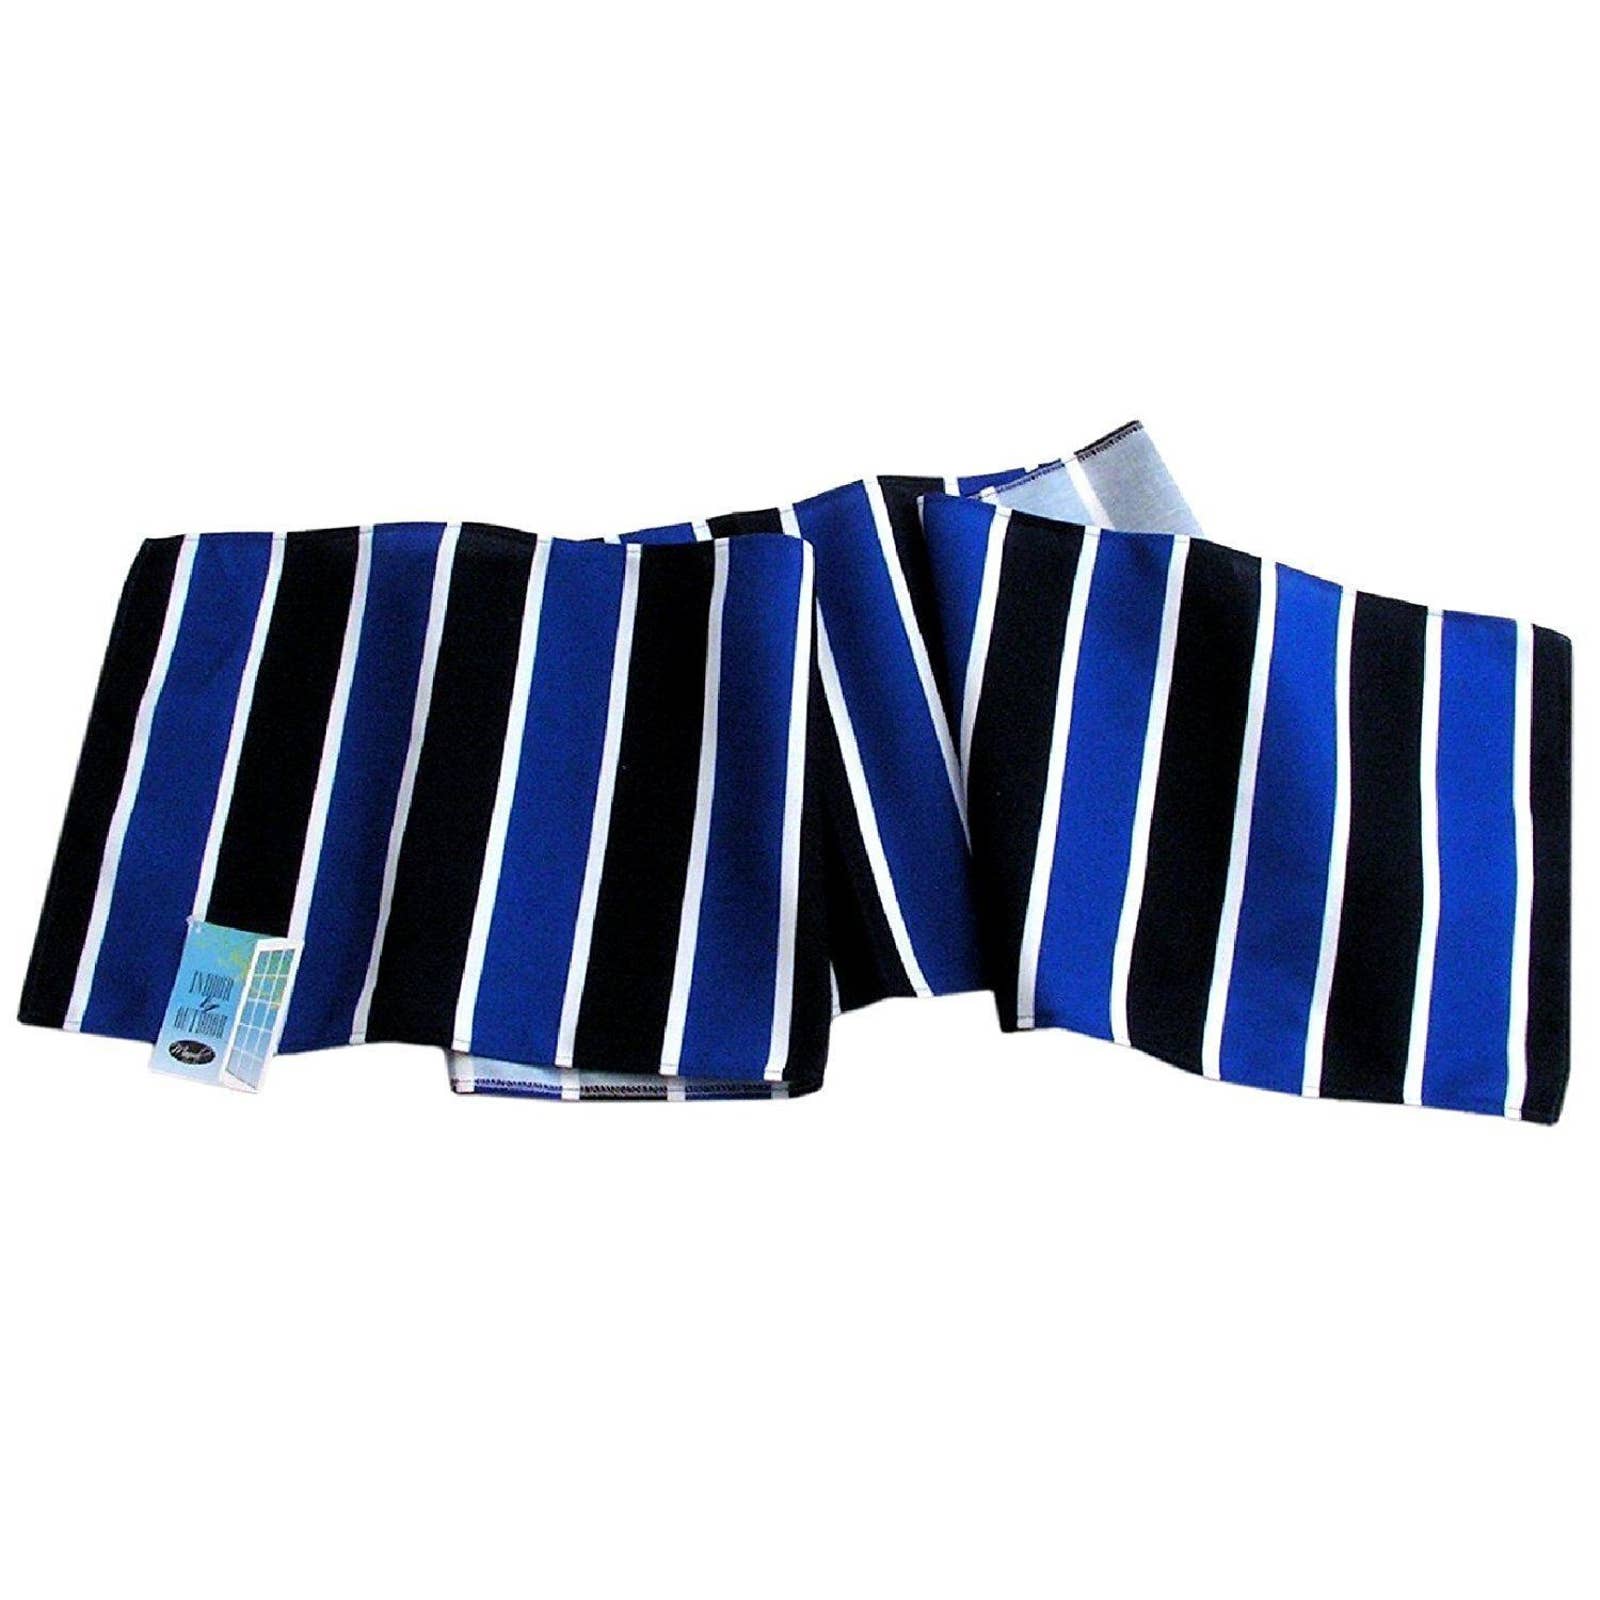 Nautical Stripe Table Runner Indoor Outdoor Canvas Awning Blue White NEW  13x72"